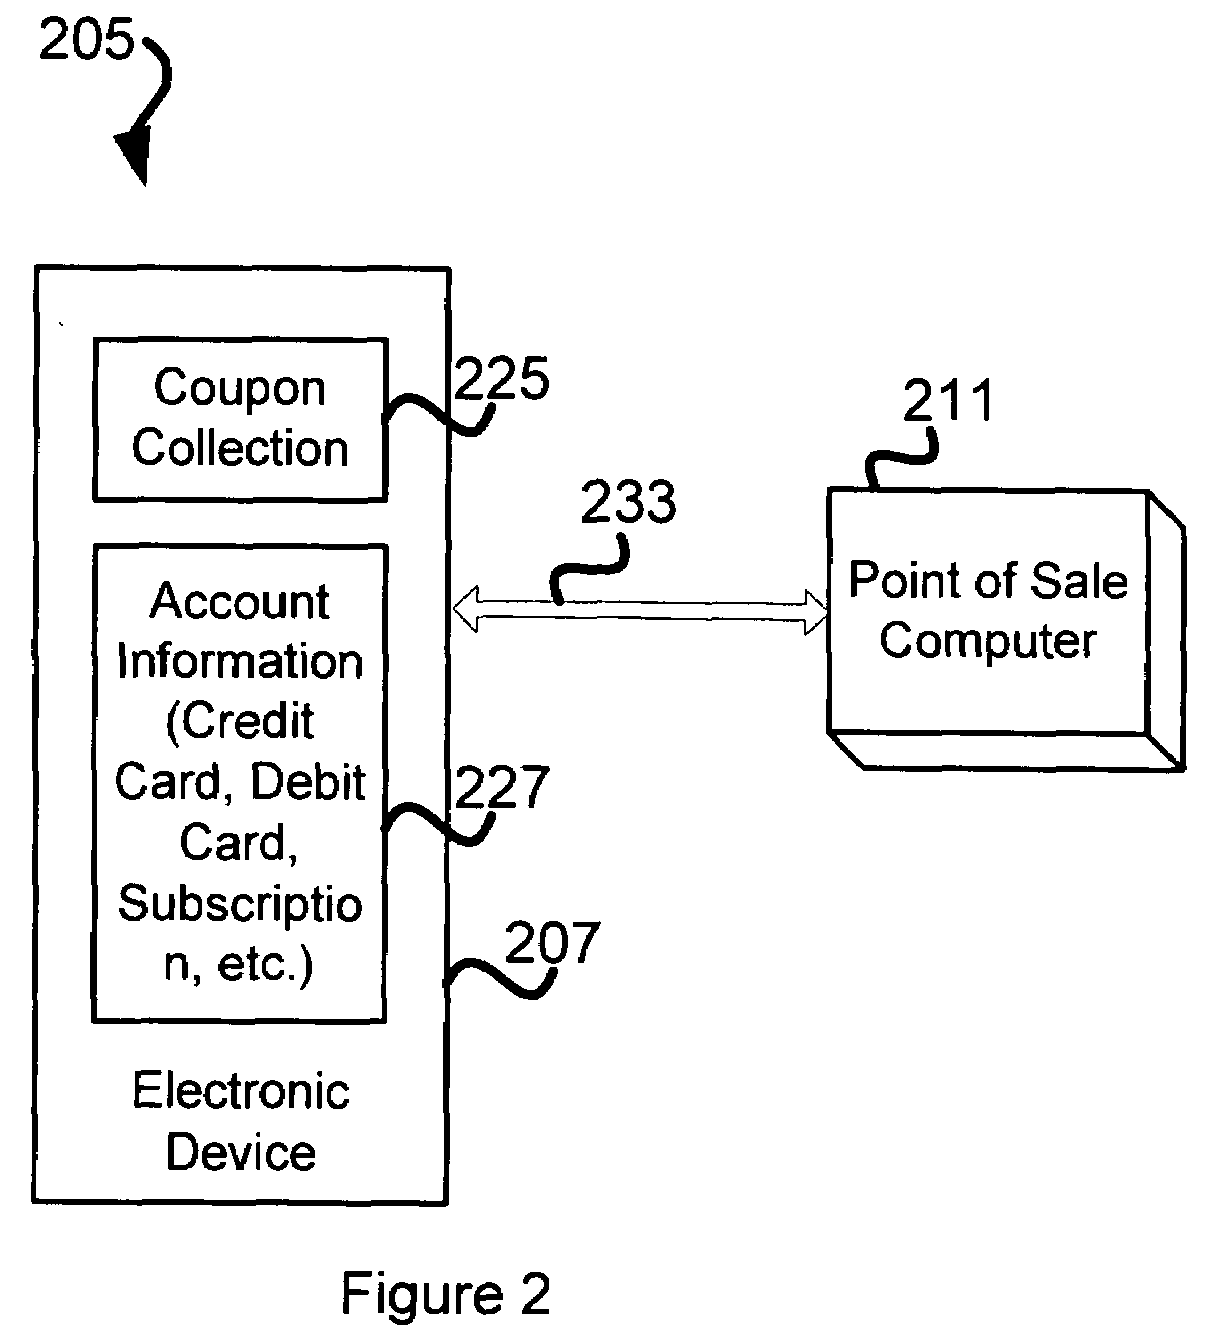 Electronic device capable of delivering coupons to a POS system and to a sales server